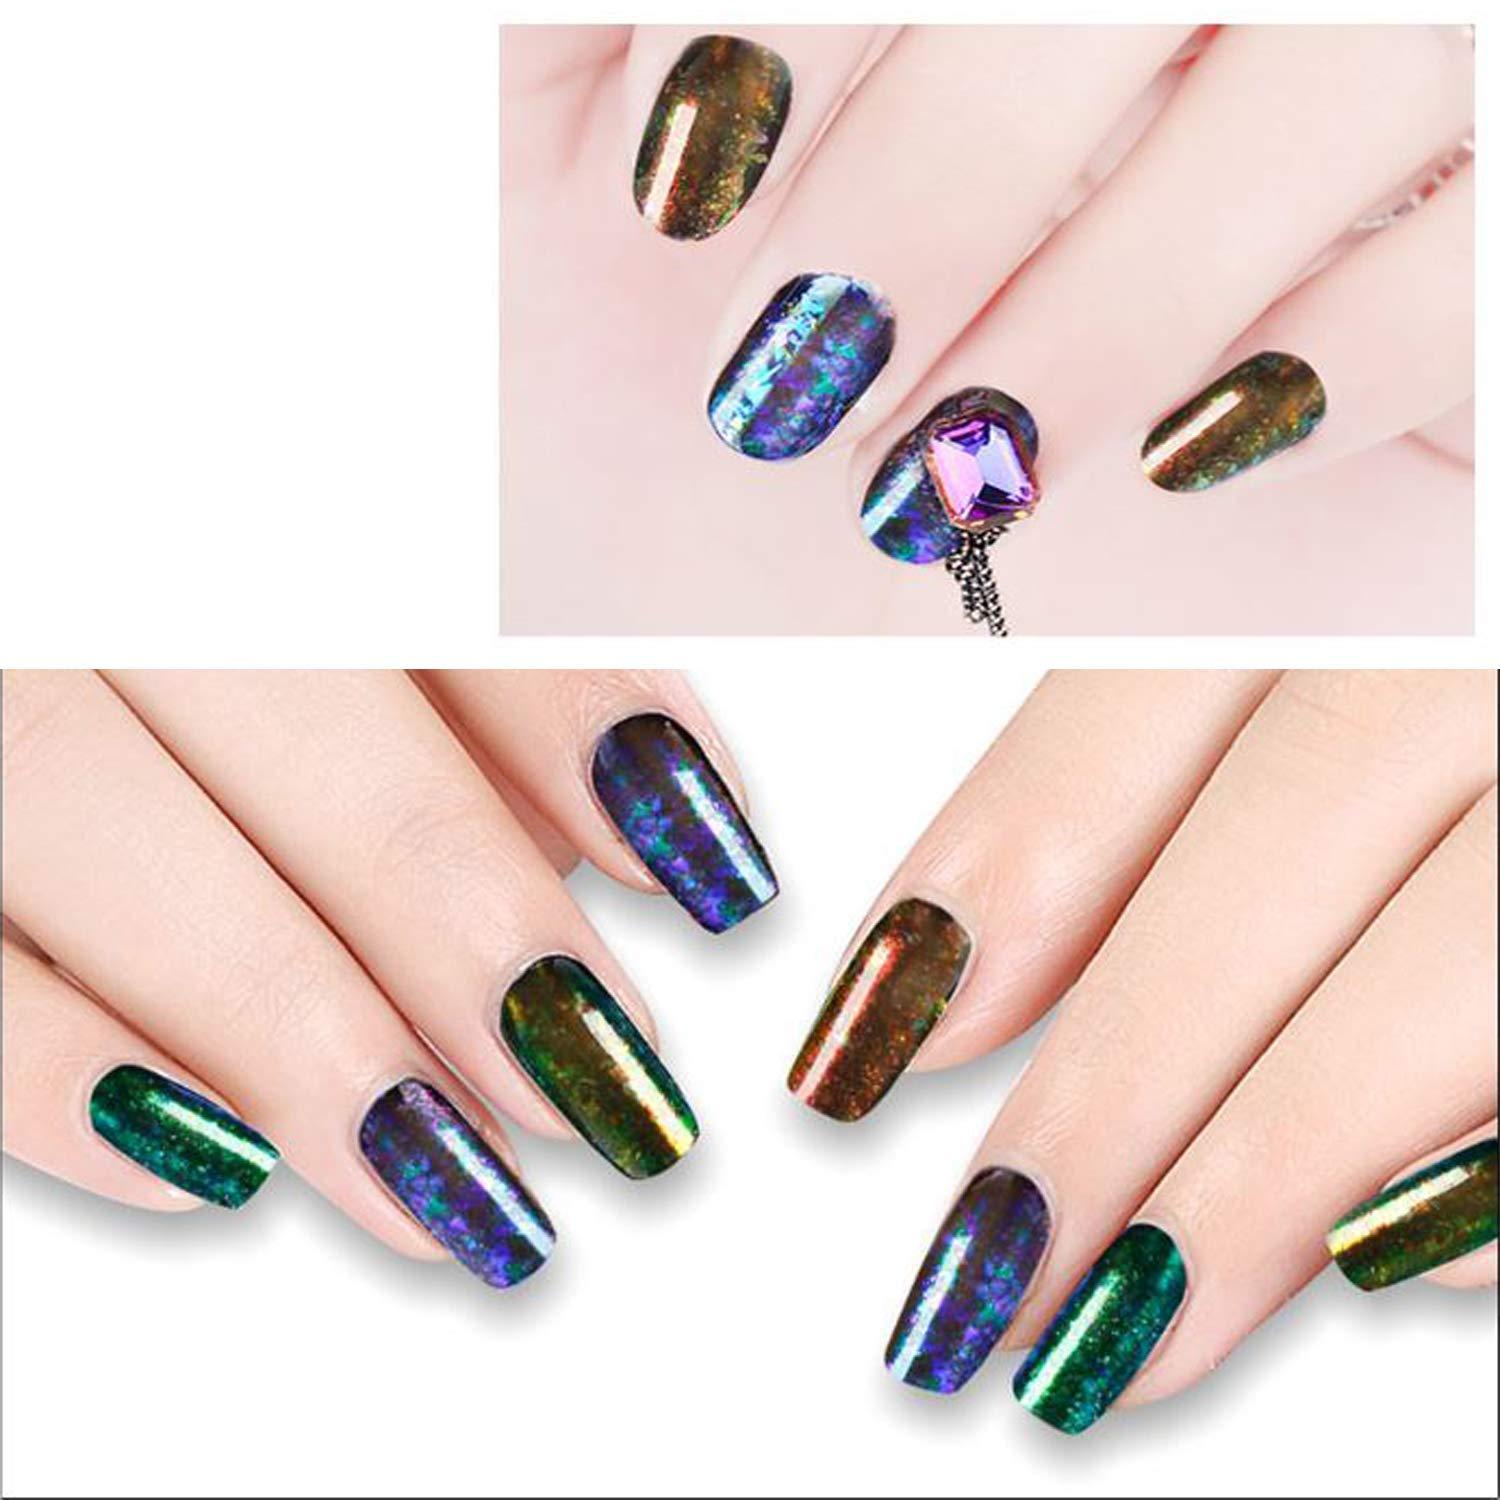 5g/lot Multi Color Iridescent crystal chameleon flakes Transparent color  change flakes for Nail art